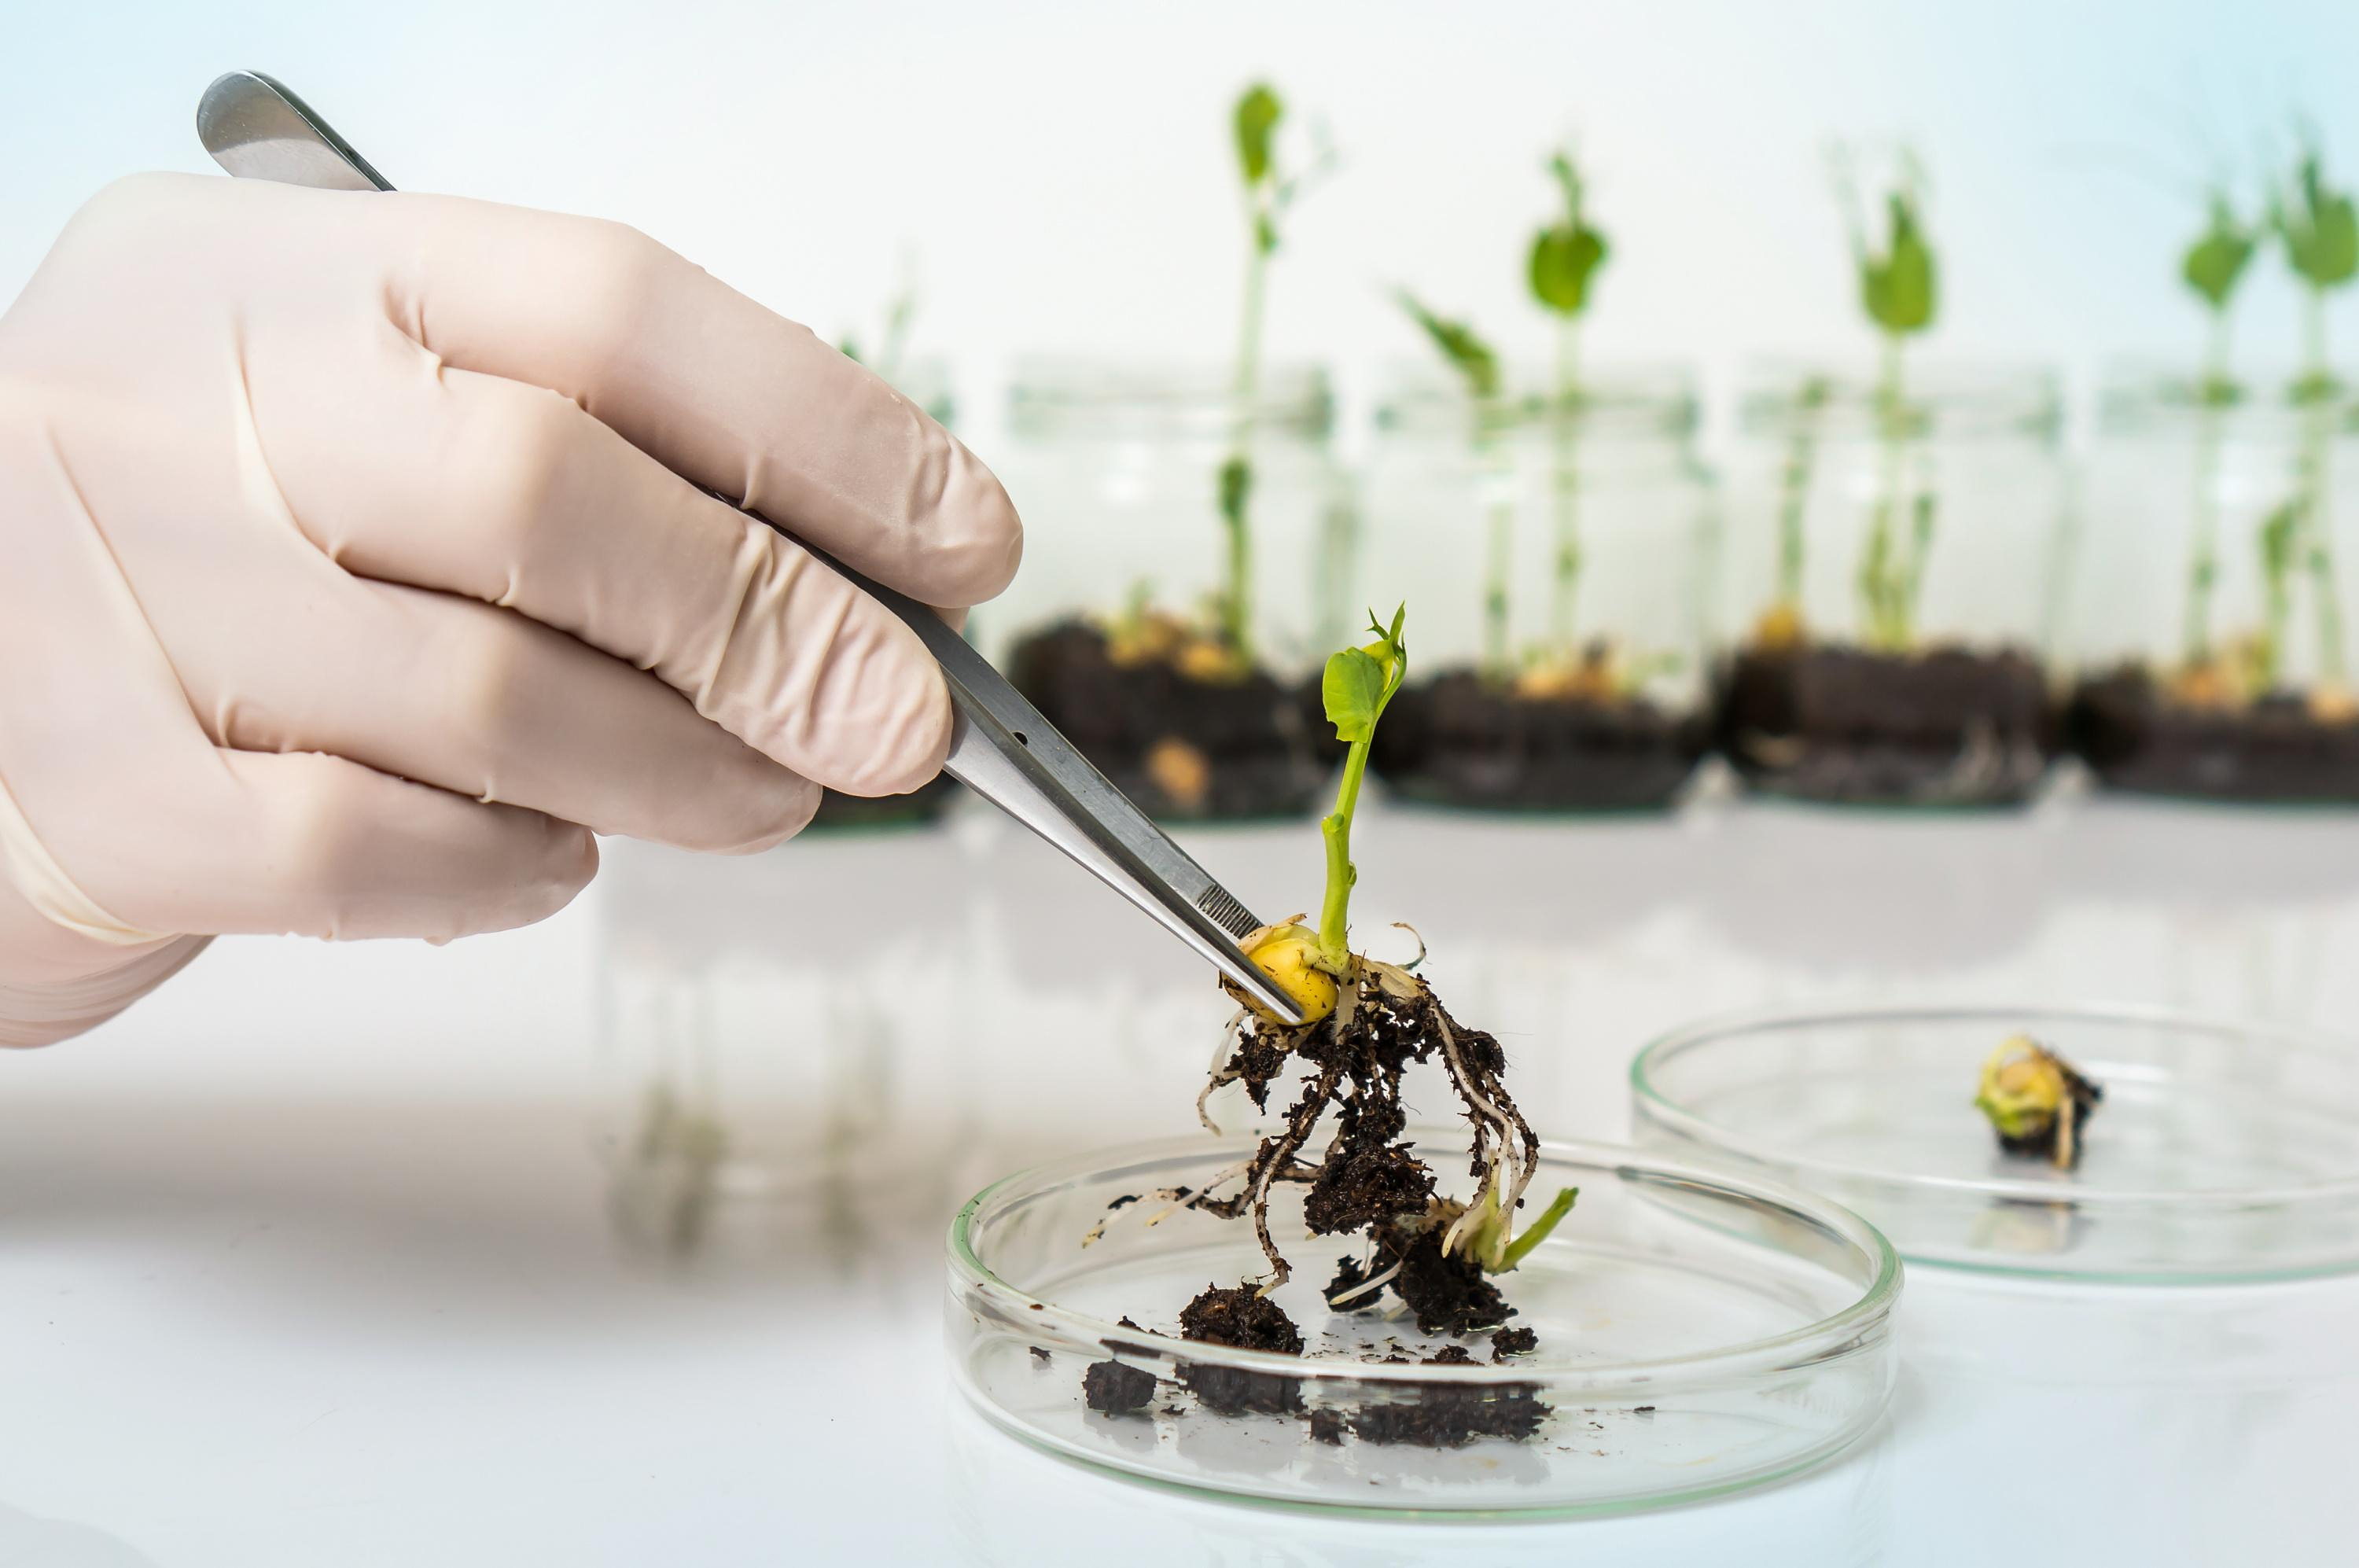 The cultivation of “new GMOs” must be studied “case by case”, according to ANSES